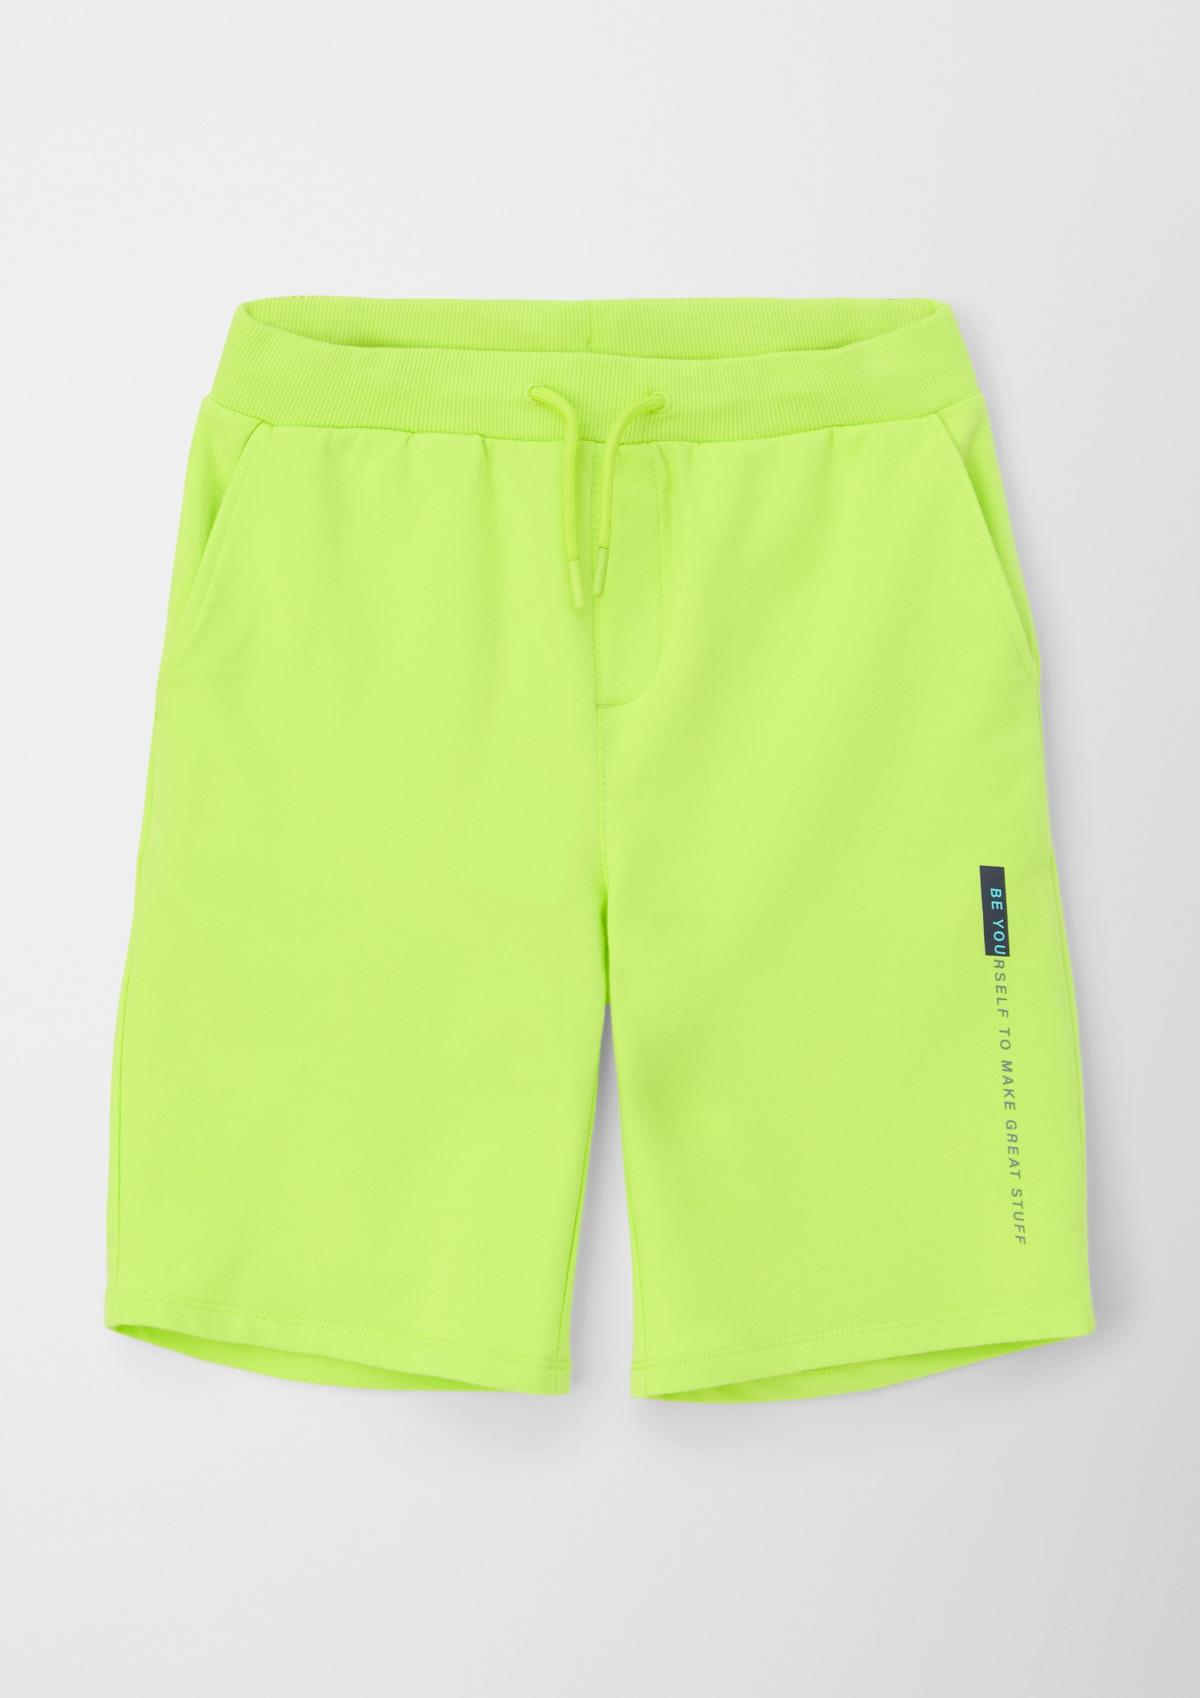 s.Oliver Relaxed fit: Sweat Bermuda shorts